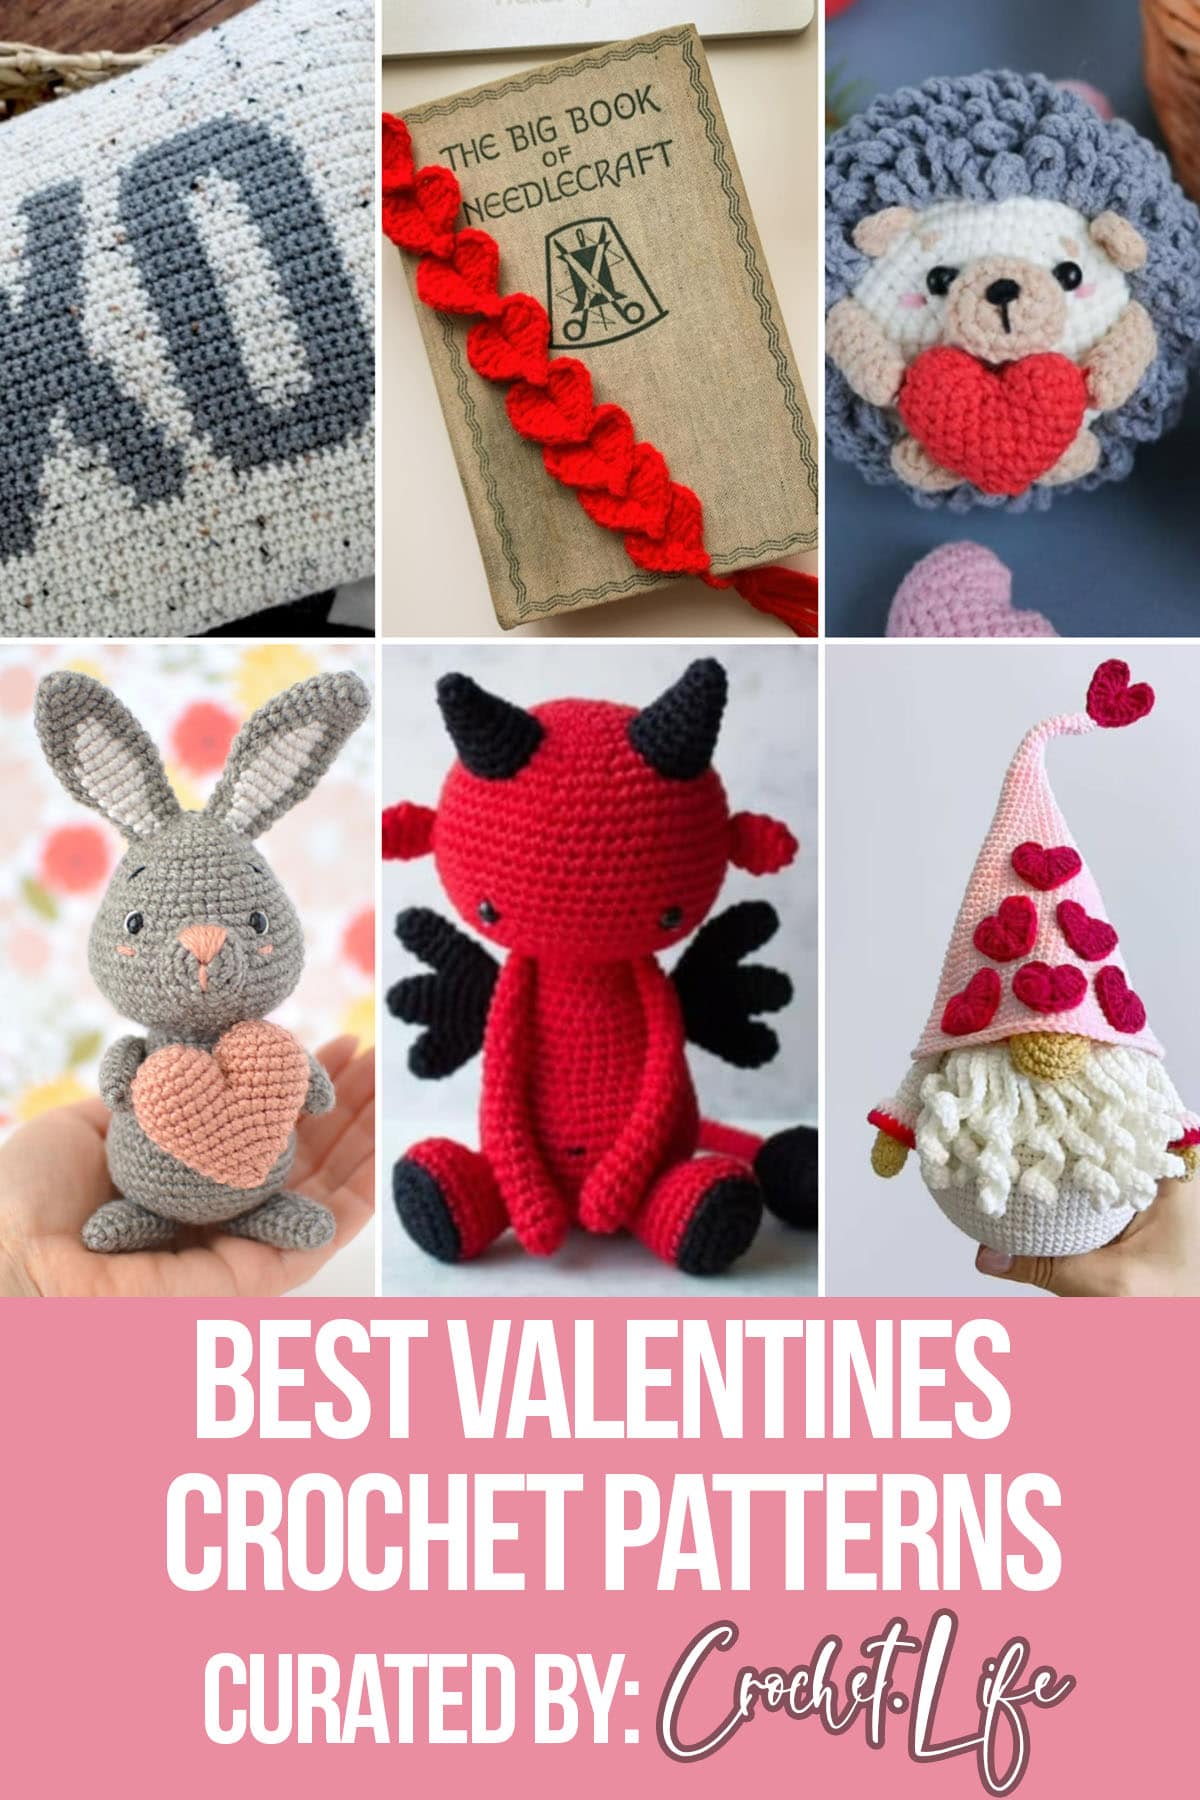 photo collage of crochet patterns for valentines with text which reads best valentines crochet patterns curated by crochet.life